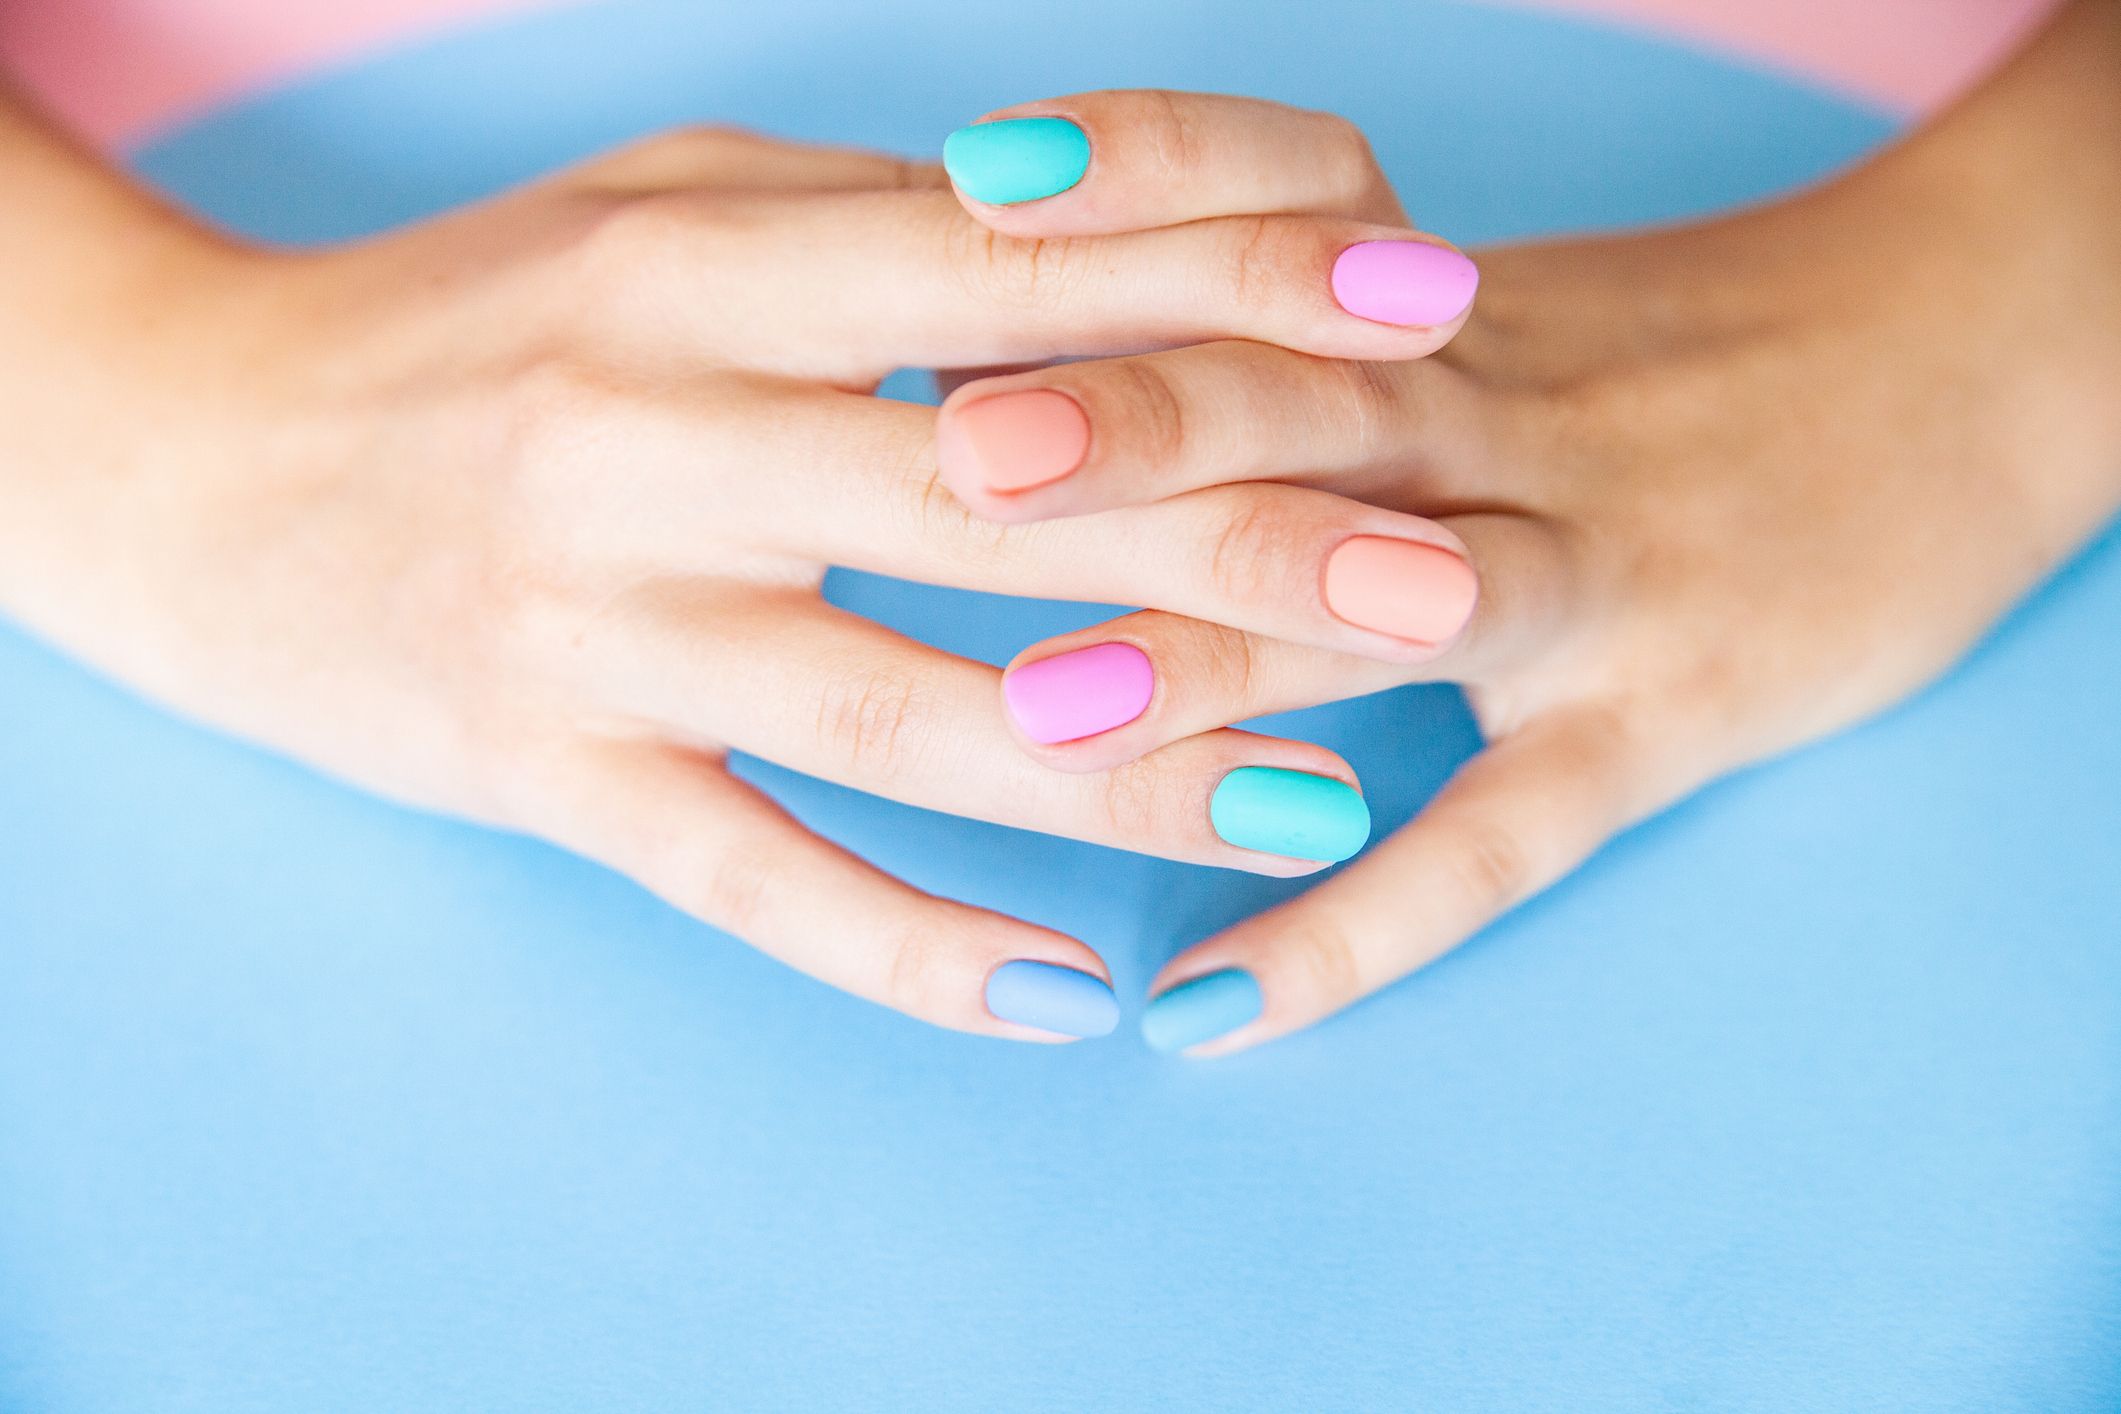 9 Things You Shouldn't Say When Getting A Manicure, According To Experts